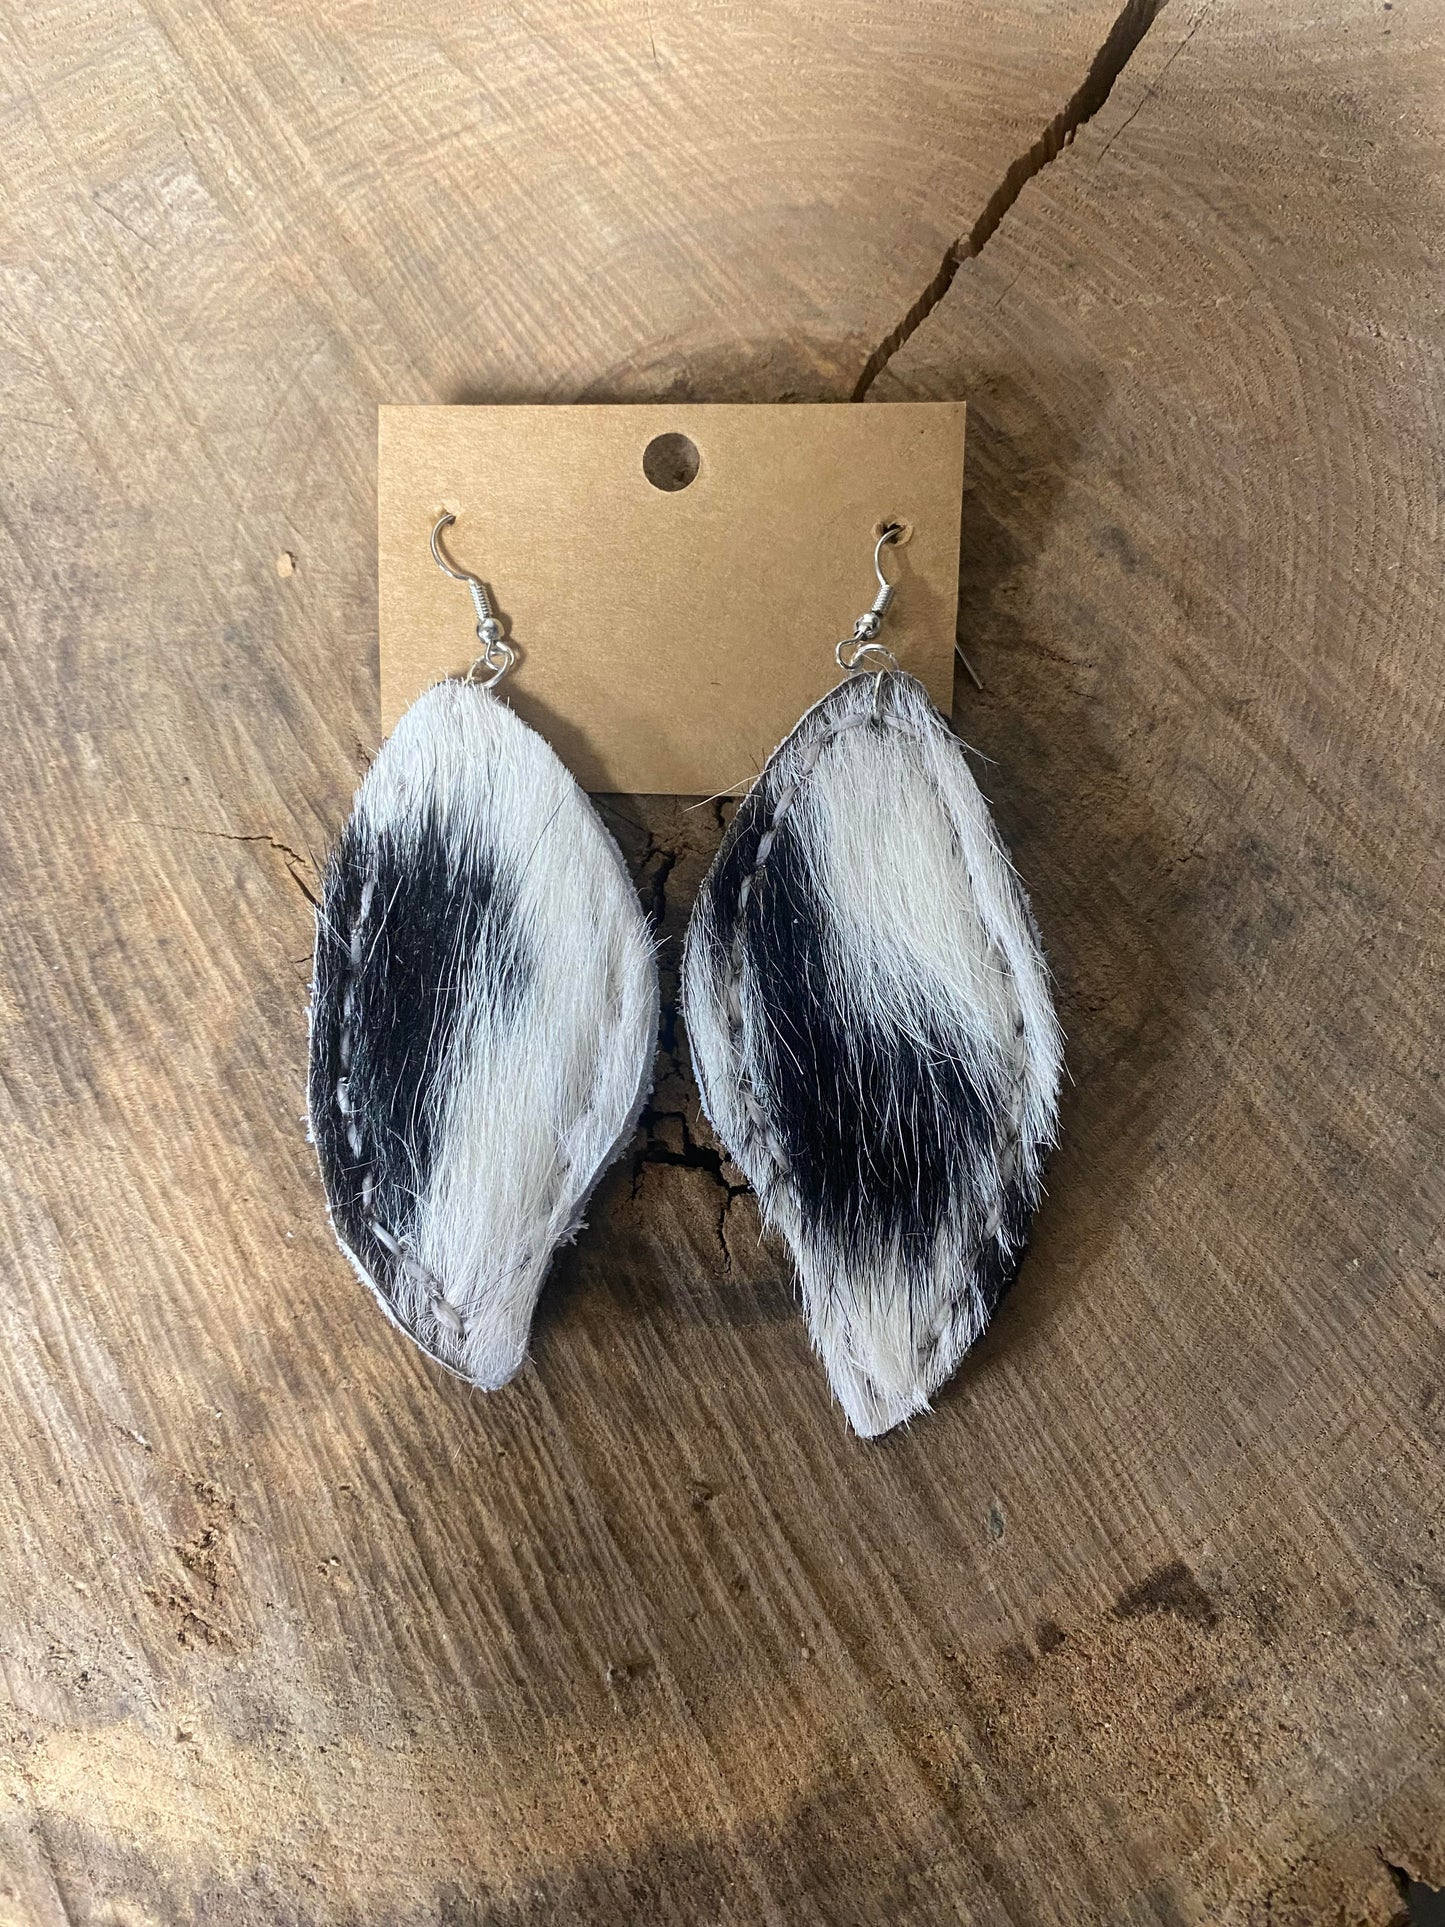 Hand Stitched Cowhide Leather Earrings